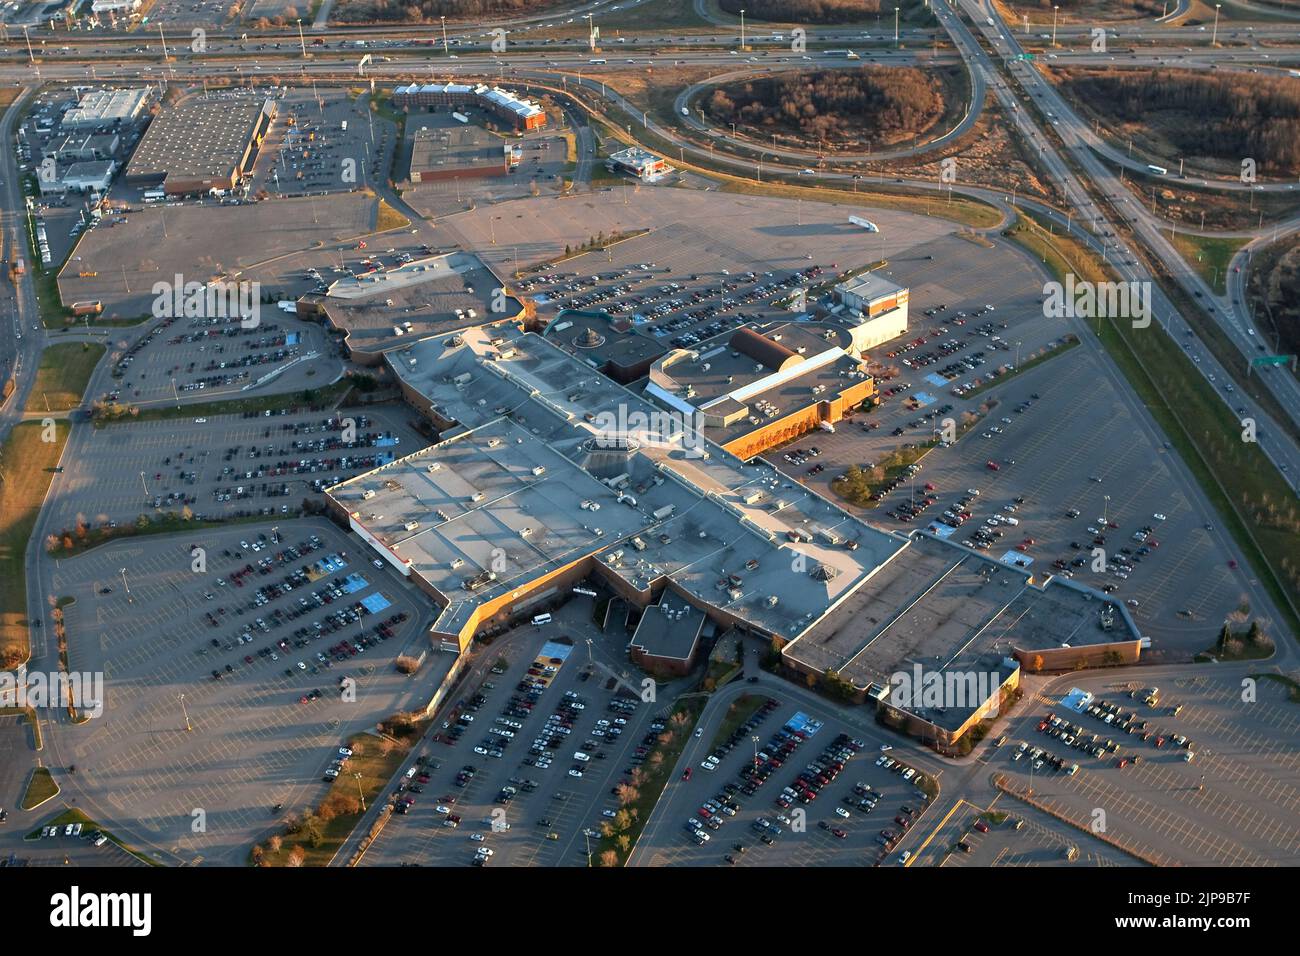 Les Galeries de la Capitale shopping mall in Quebec city is pictured in this aerial photo November 11, 2009. Most visited mall largest mall in the city, Les Galeries de la Capitale has 280 stores, 35 restaurants and the IMAX theater with the largest screen in Canada. Stock Photo